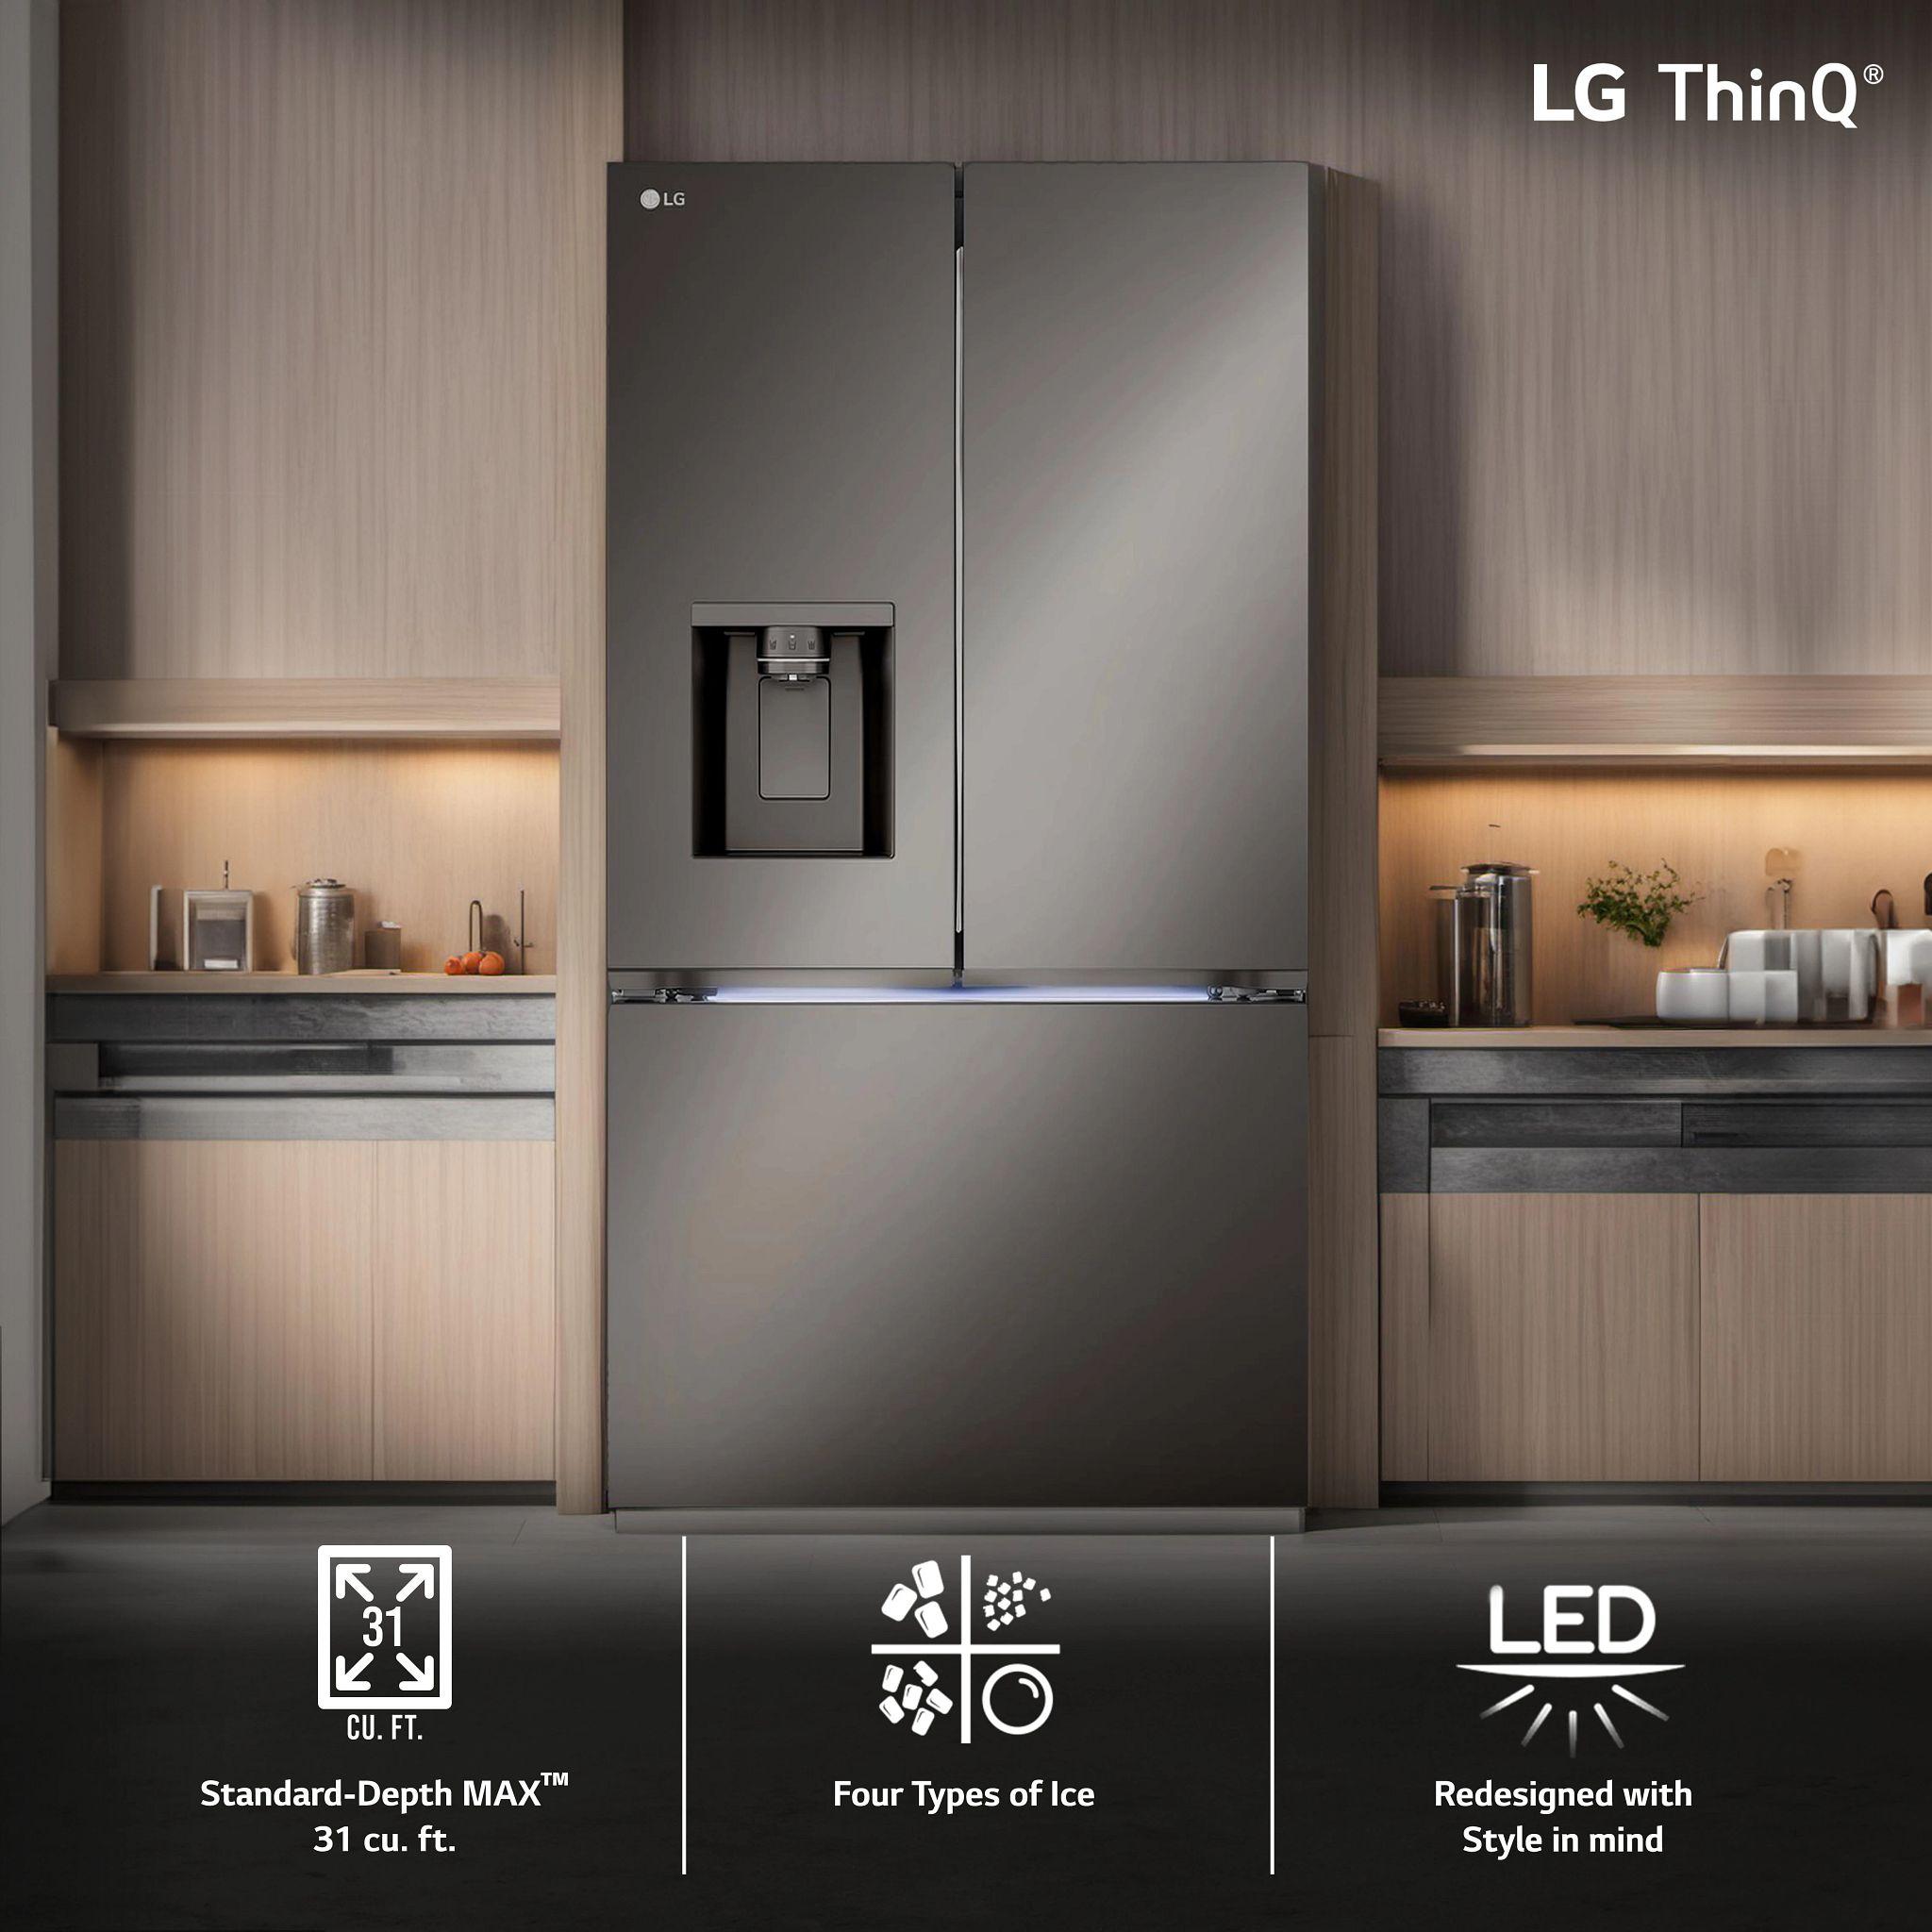 Lg 31 cu. ft. Smart Standard-Depth MAX? French Door Refrigerator with Four Types of Ice